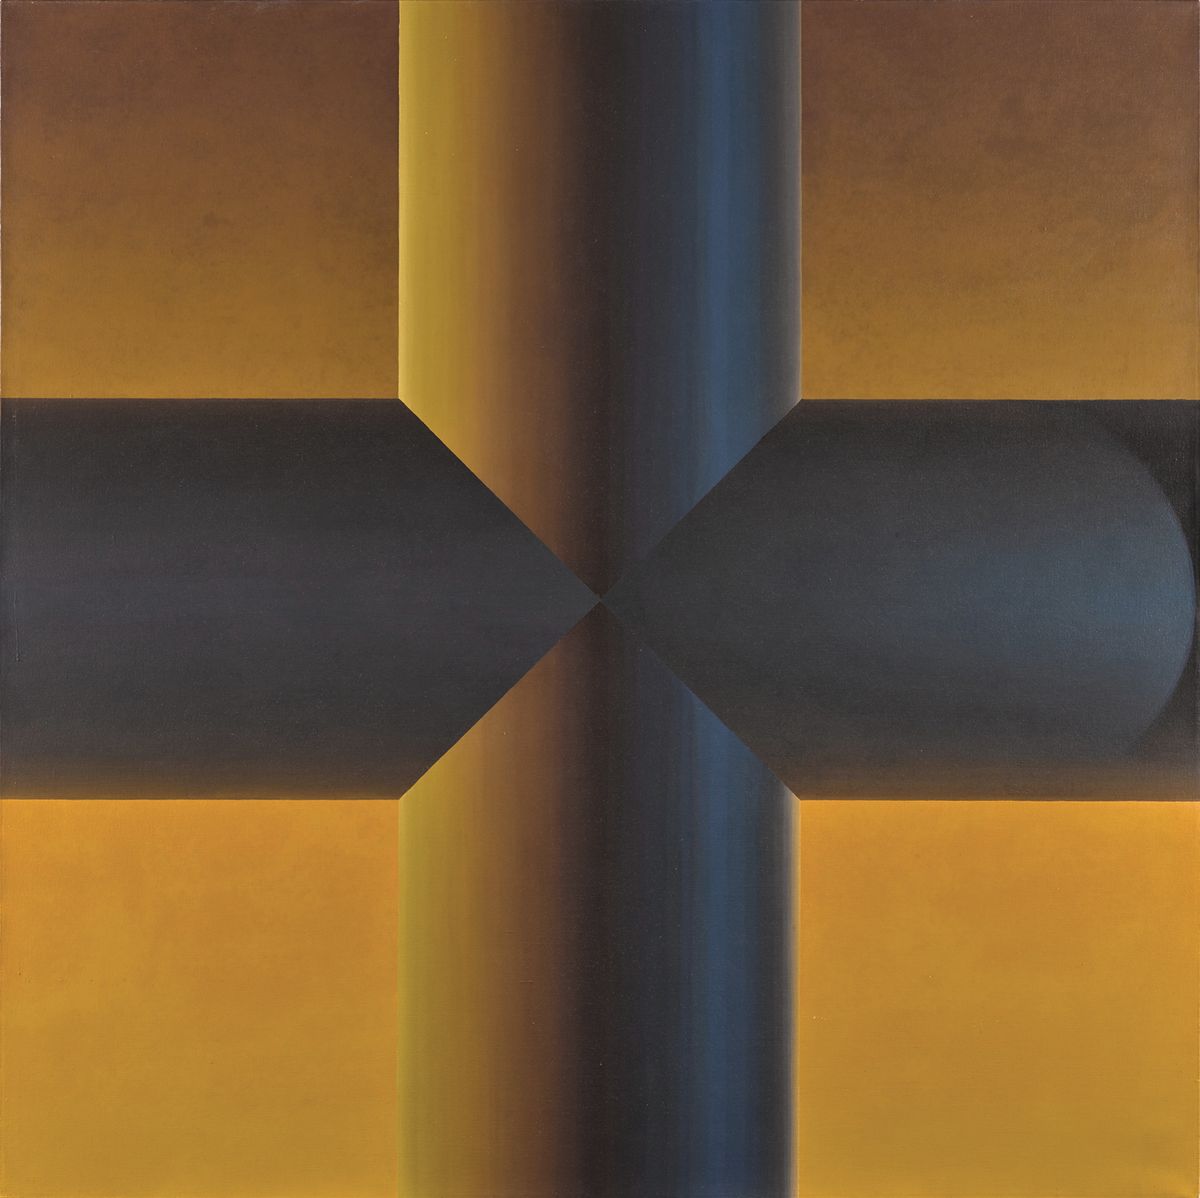 Samia Halaby’s Seventh Cross No. 229 (1969) sold for £300,000 (£381,000 with fees), triple its low estimate, at Sotheby’s 20th century art of the Middle East sale in London on 24 October

Halaby: courtesy Sotheby’s